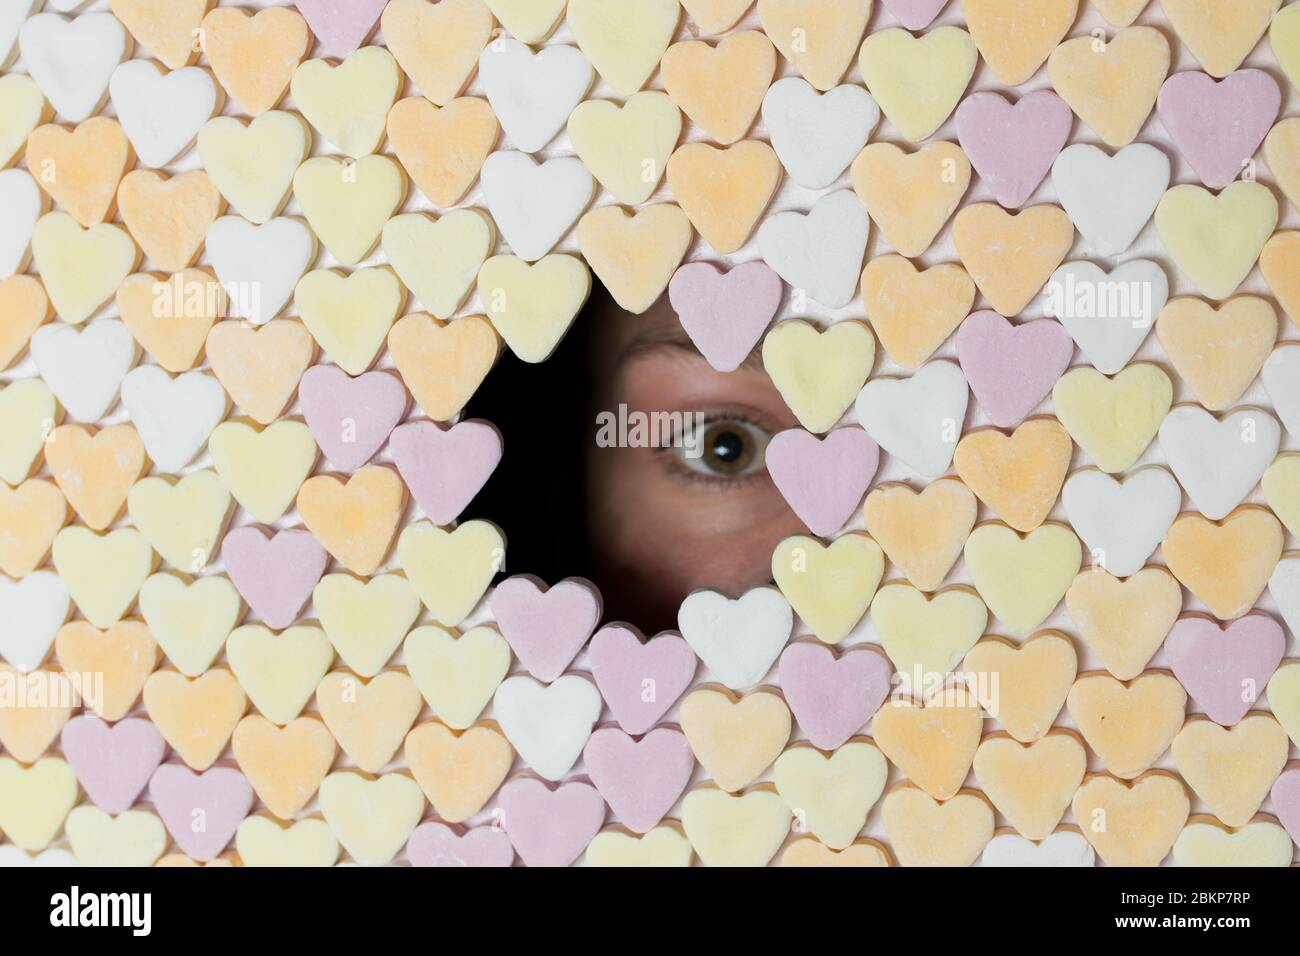 Girl peaking with one eye through hole in wall of heart-shaped sweets. Royalty free stock photo. Stock Photo